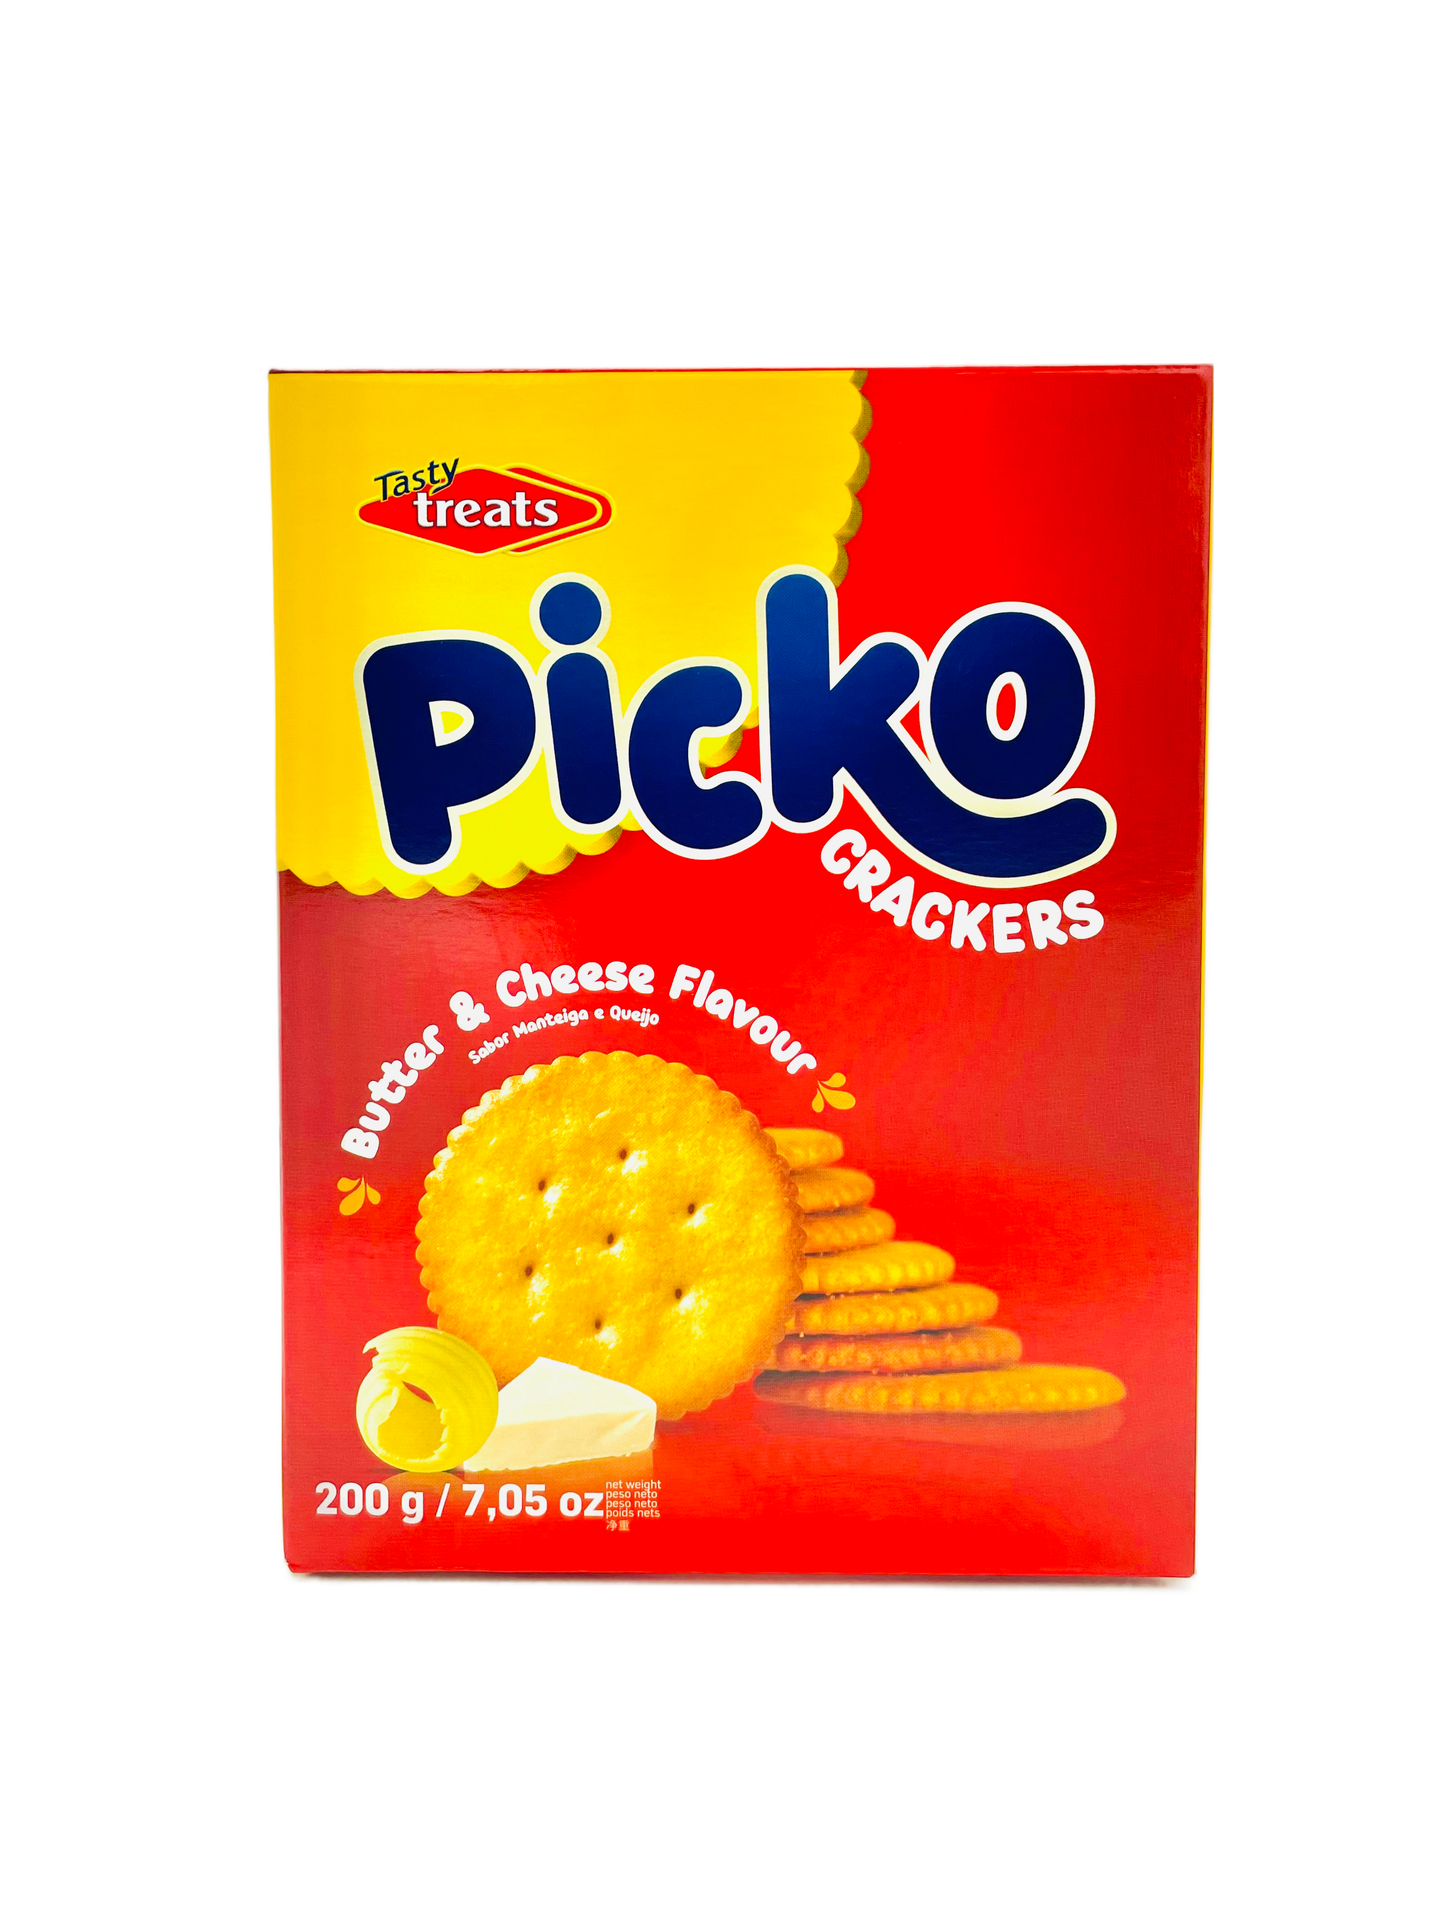 Tasty Treats Picko Butter & Cheese Flavour Crackers 200g